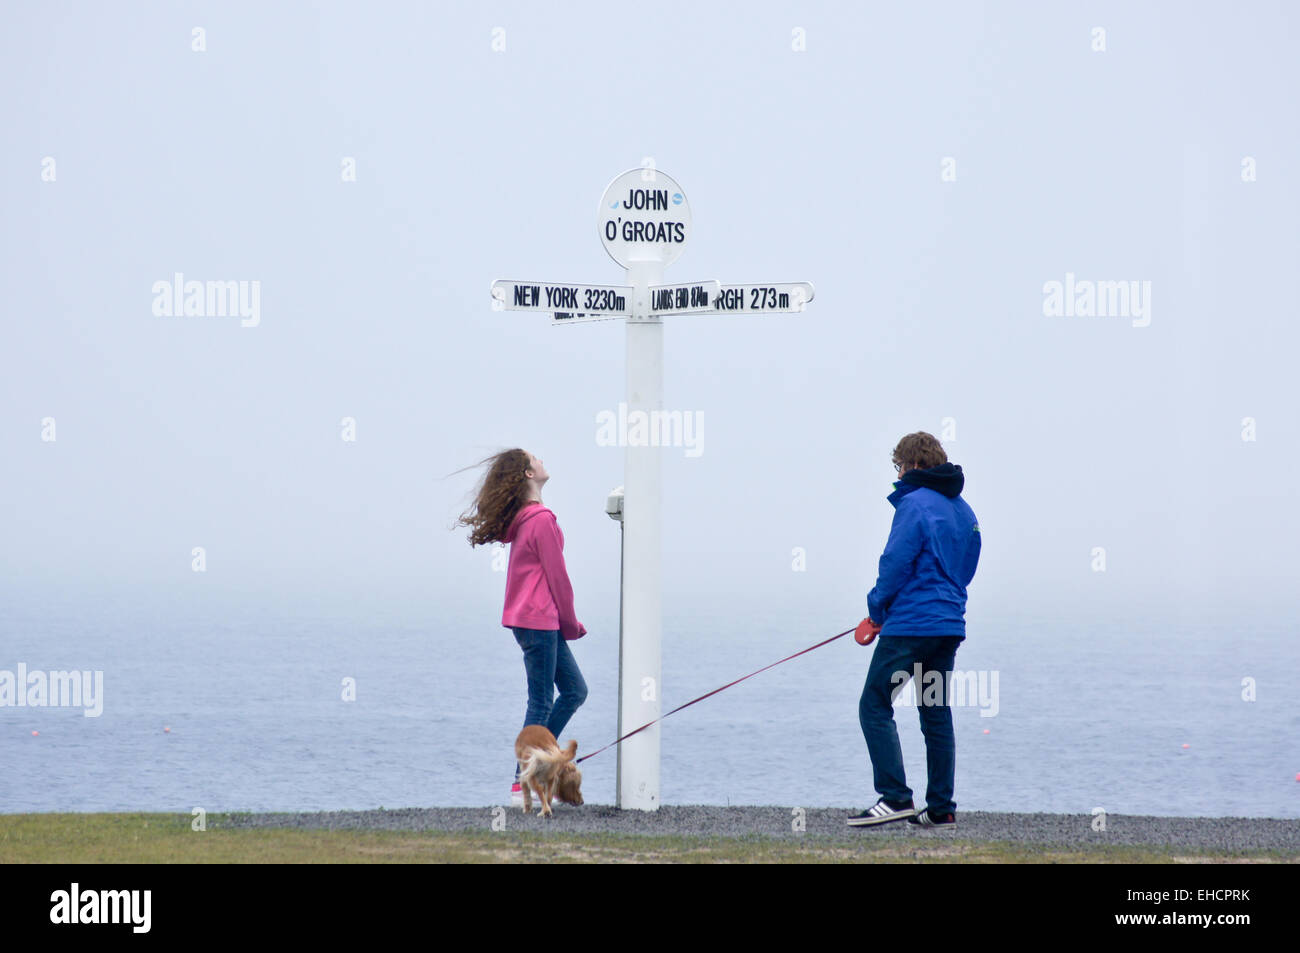 Walkers passing the sign showing distances to Land's End, John O'Groats, Caithness, Scotland, with a dog on a lead Stock Photo